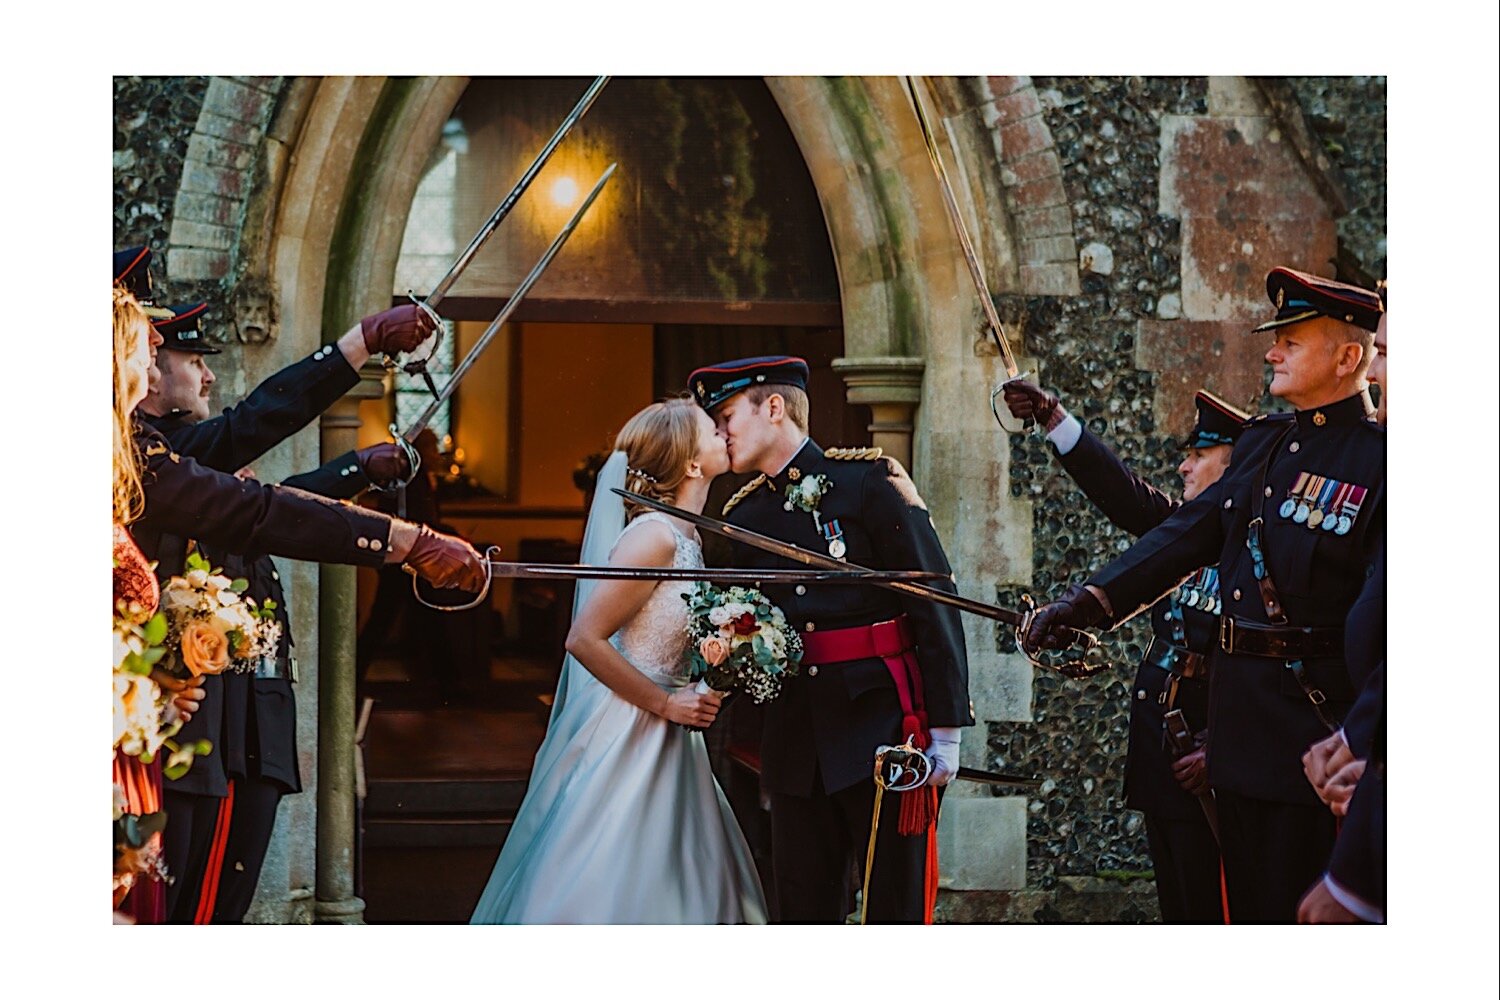 063_TWS-671_bride_groom_photography_guard_henley_oxfordshire_millitary_of_crooked_wedding_confetti_honour_winter_billet.jpg